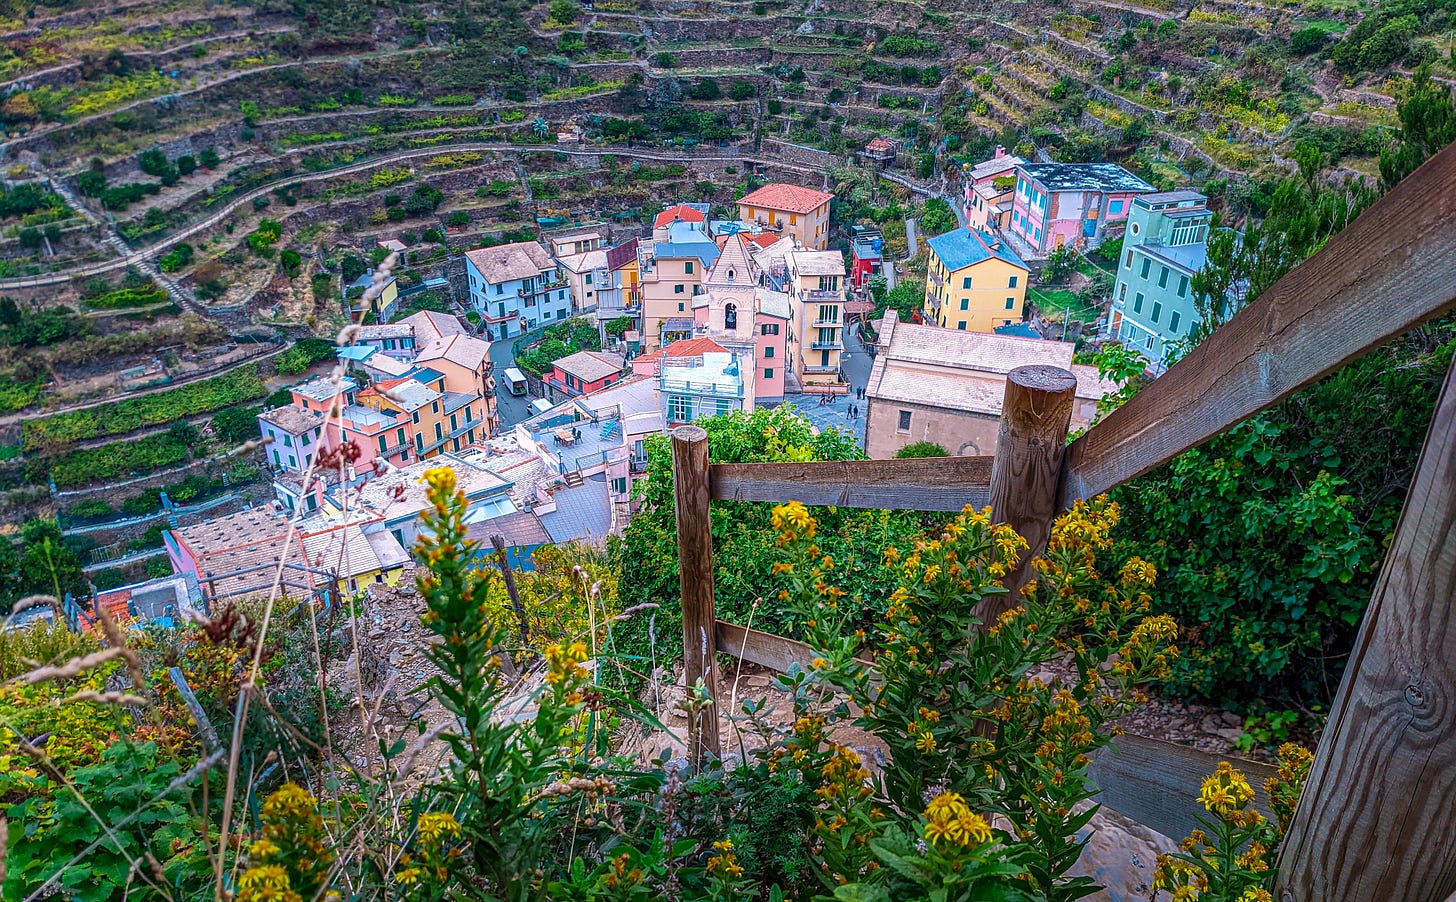 A view of Riomaggiore showing a very steep descent past bushes with yellow flowers, the pinks and blue of Riomaggiore at the bottom while the terraced hillside rises up on the far side. 